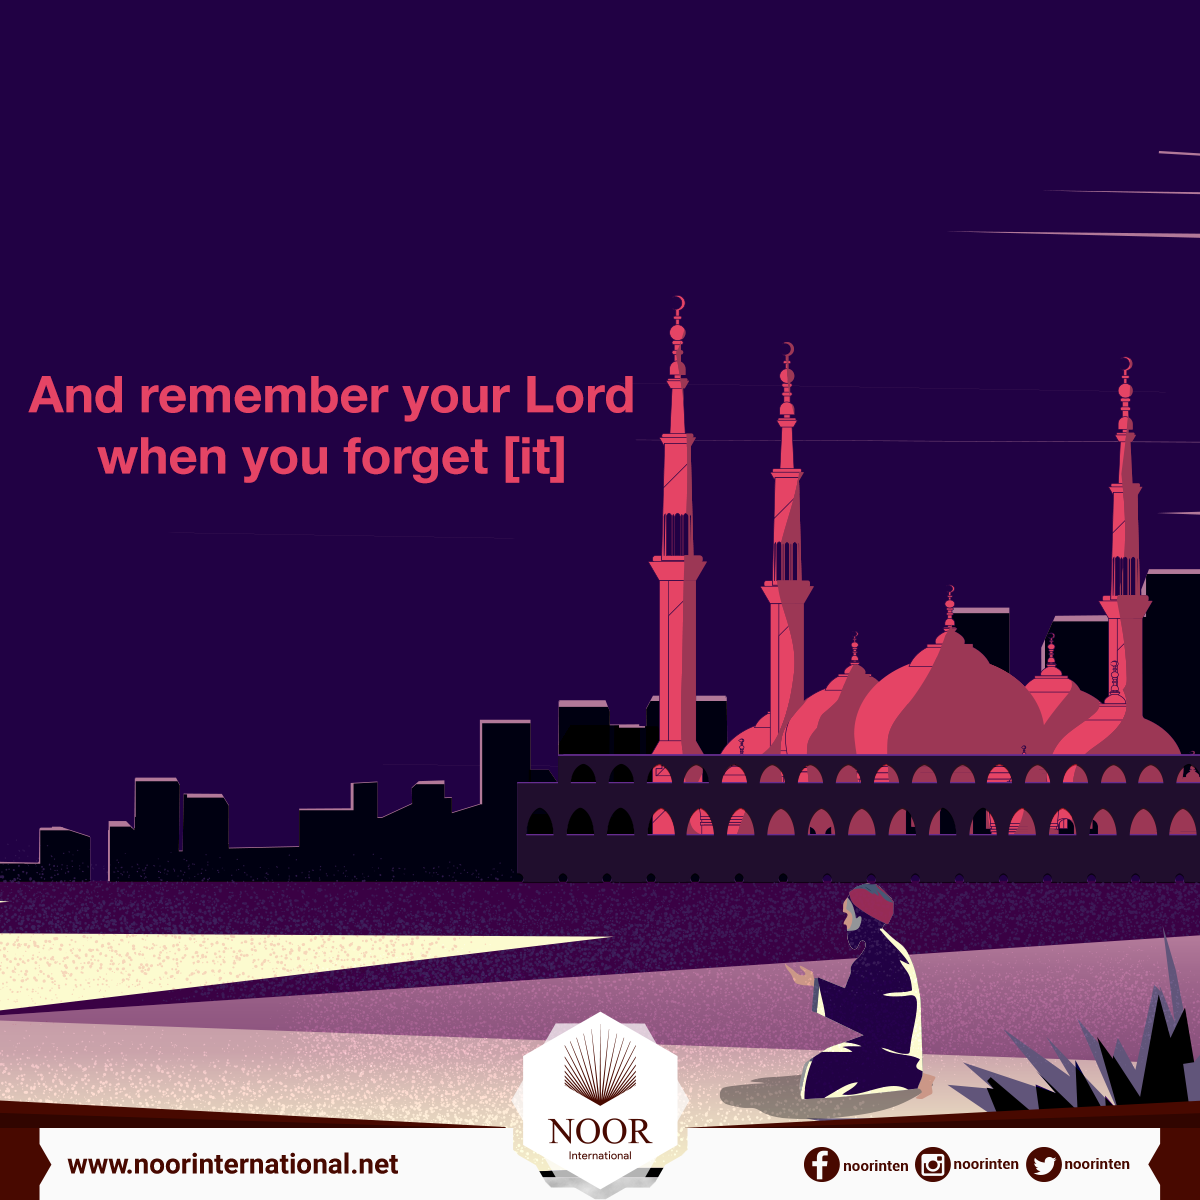 And remember your Lord when you forget [it]